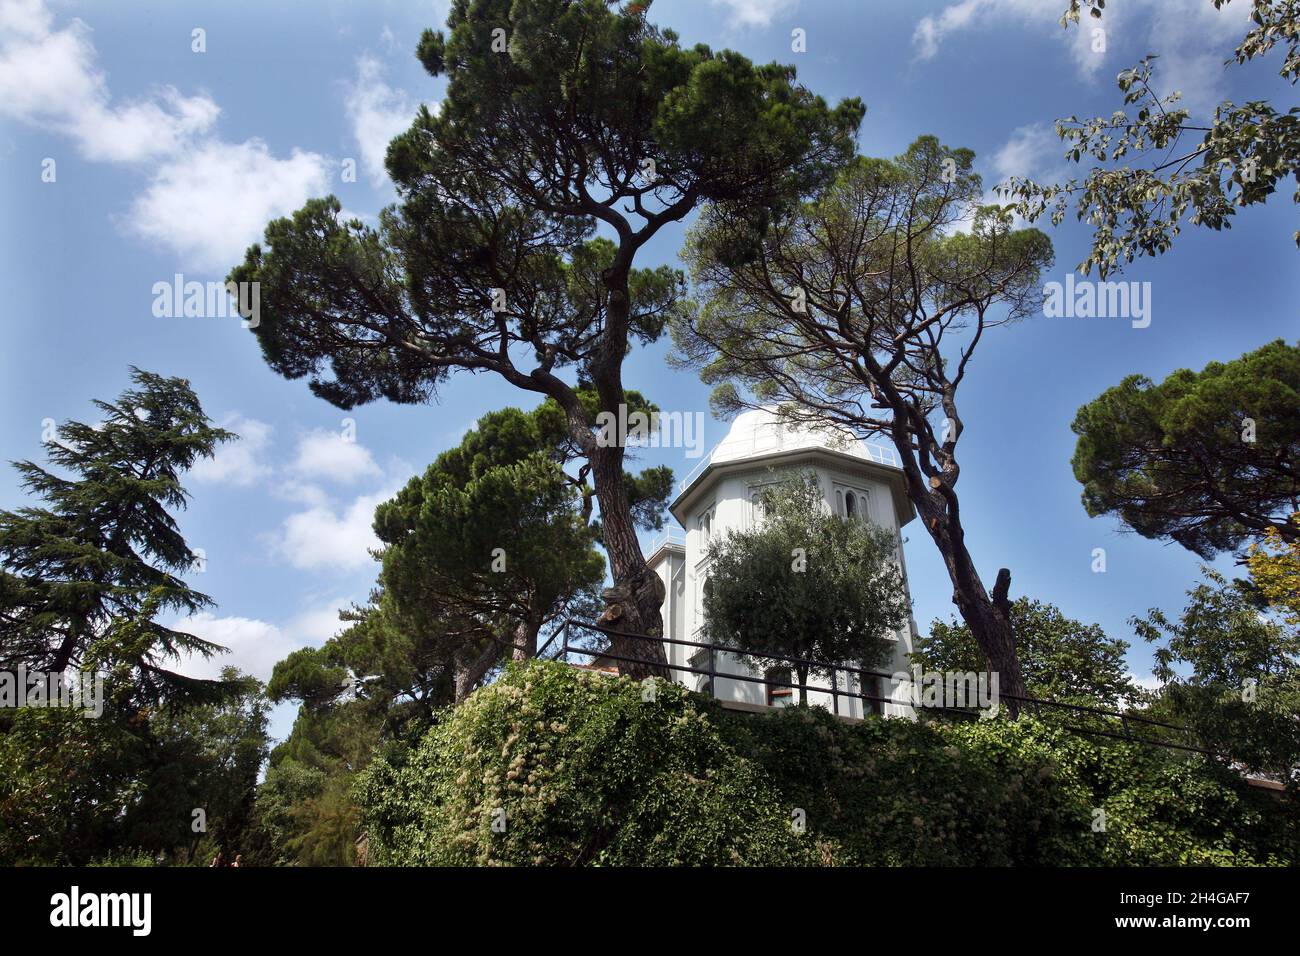 Kandilli Observatory and Earthquake Research Institute Building in Istanbul, Turkey. Stock Photo